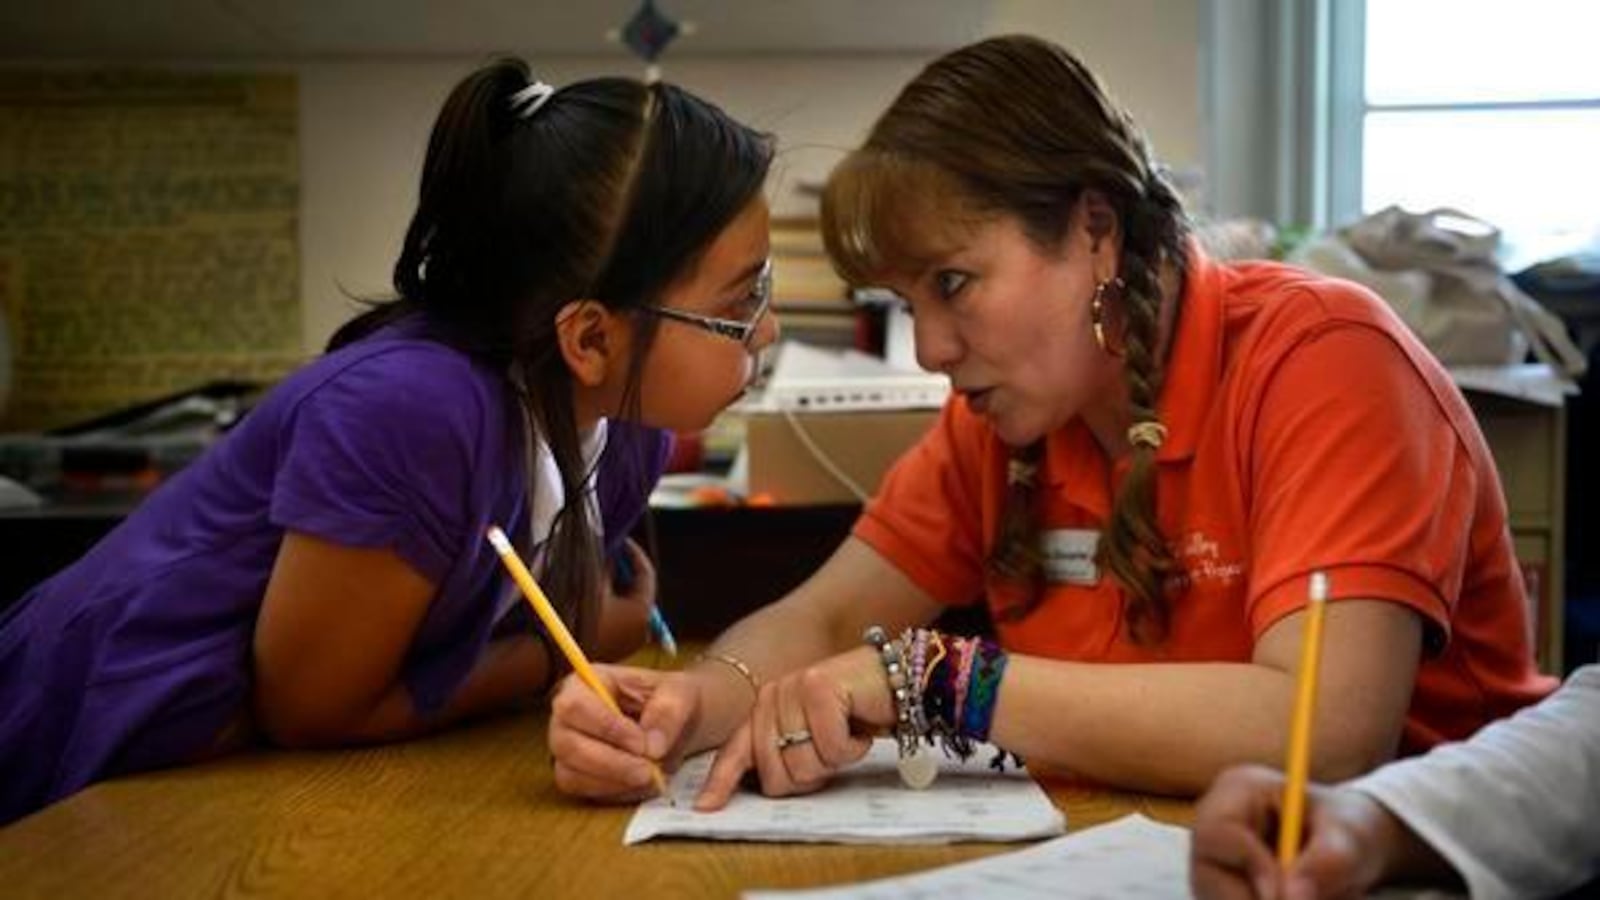 A parent mentor helps a student with a math problem at Crystal River Elementary School in Carbondale in 2013.